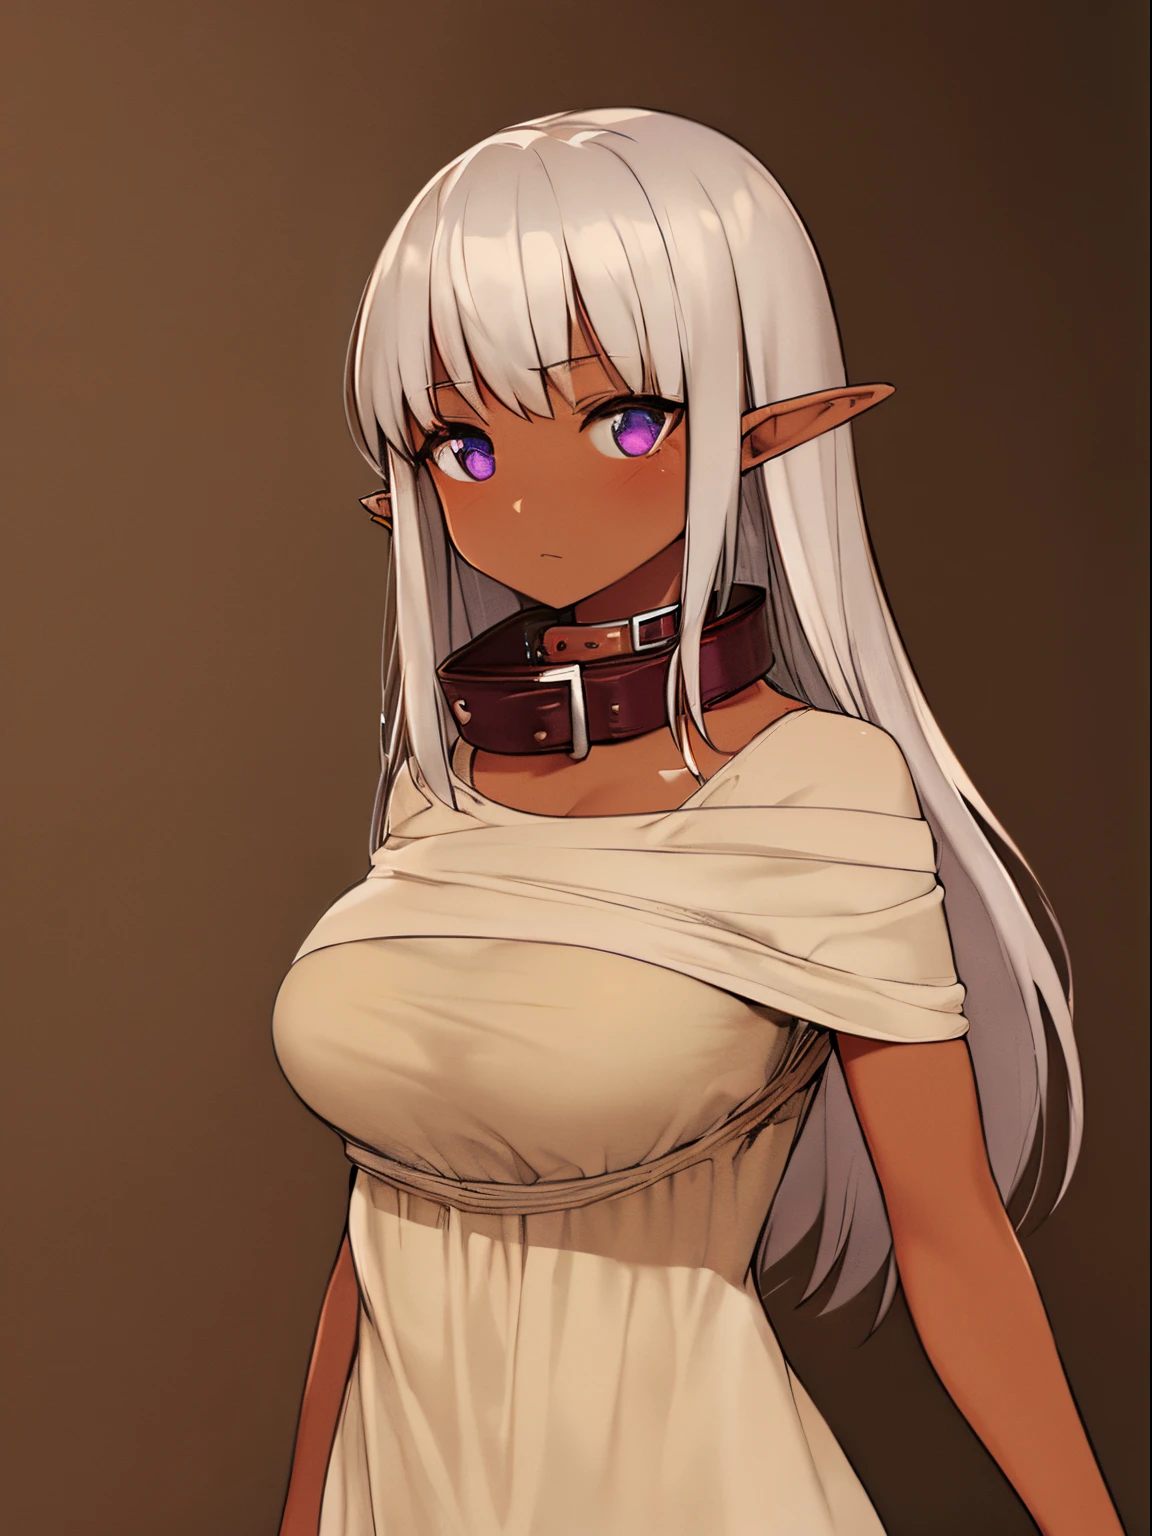 (short young small girl:1.2), (tanned elf girl), (best quality), (highres:1.1), (purple eyes), (long silver hair), (large breasts:1.2), (collar:1.2), (beige rags slave:1.2), (sepia background:1.2)